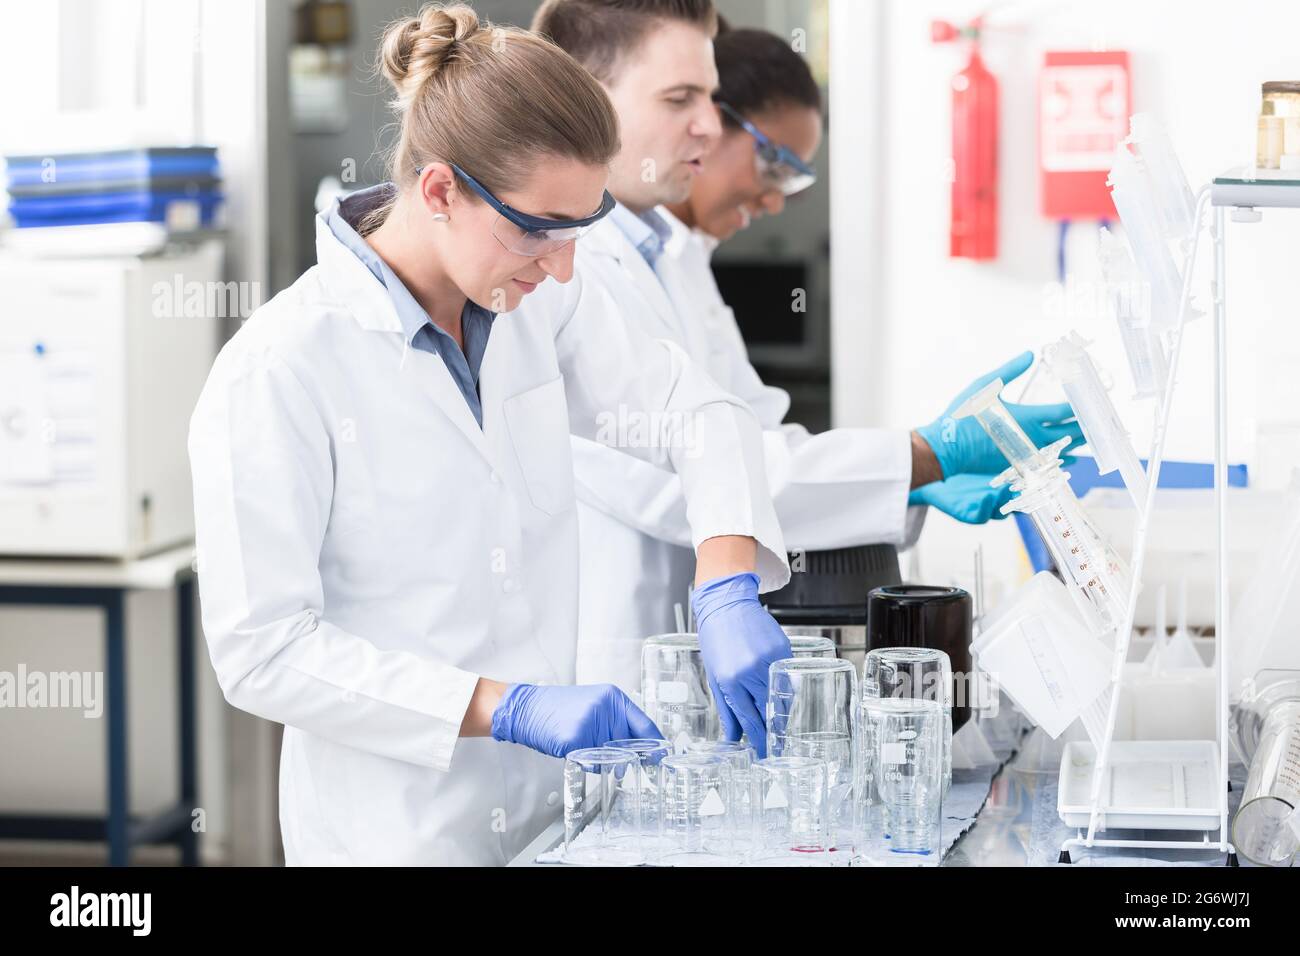 Scientists in research lab with safety goggles Stock Photo